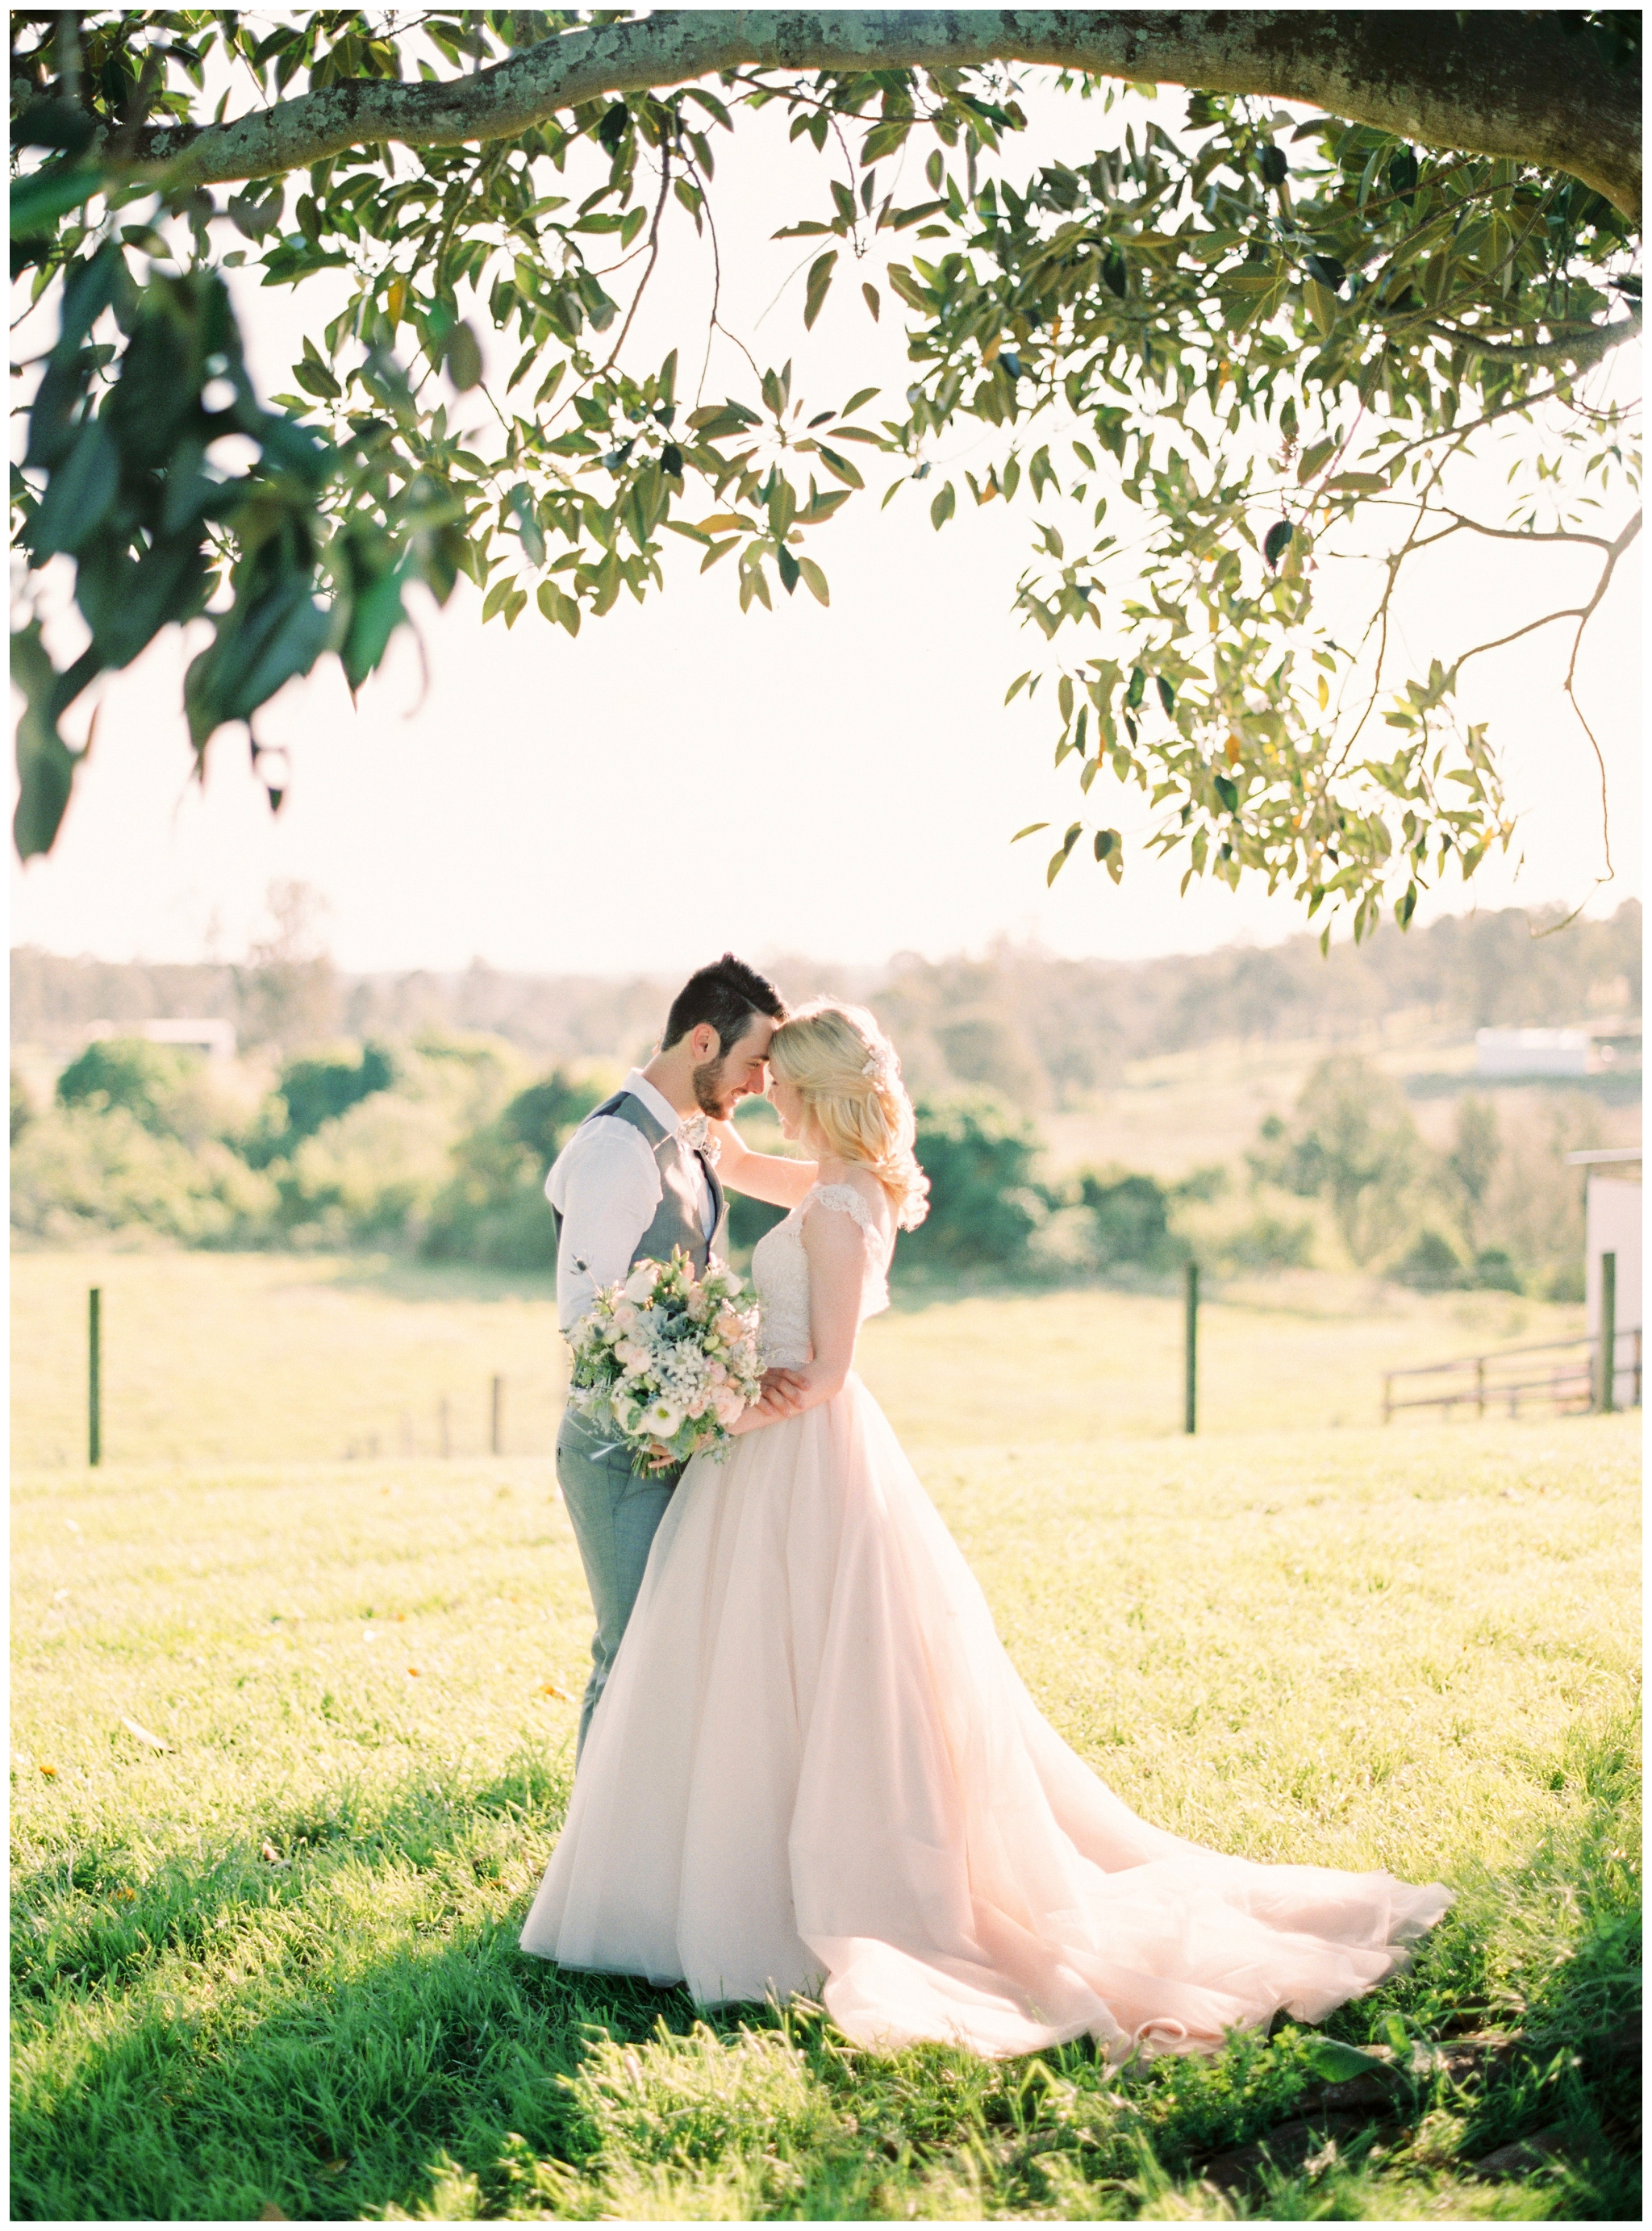 Tegan and Alex Wedding at Albert River Wines by Casey Jane Photography 46